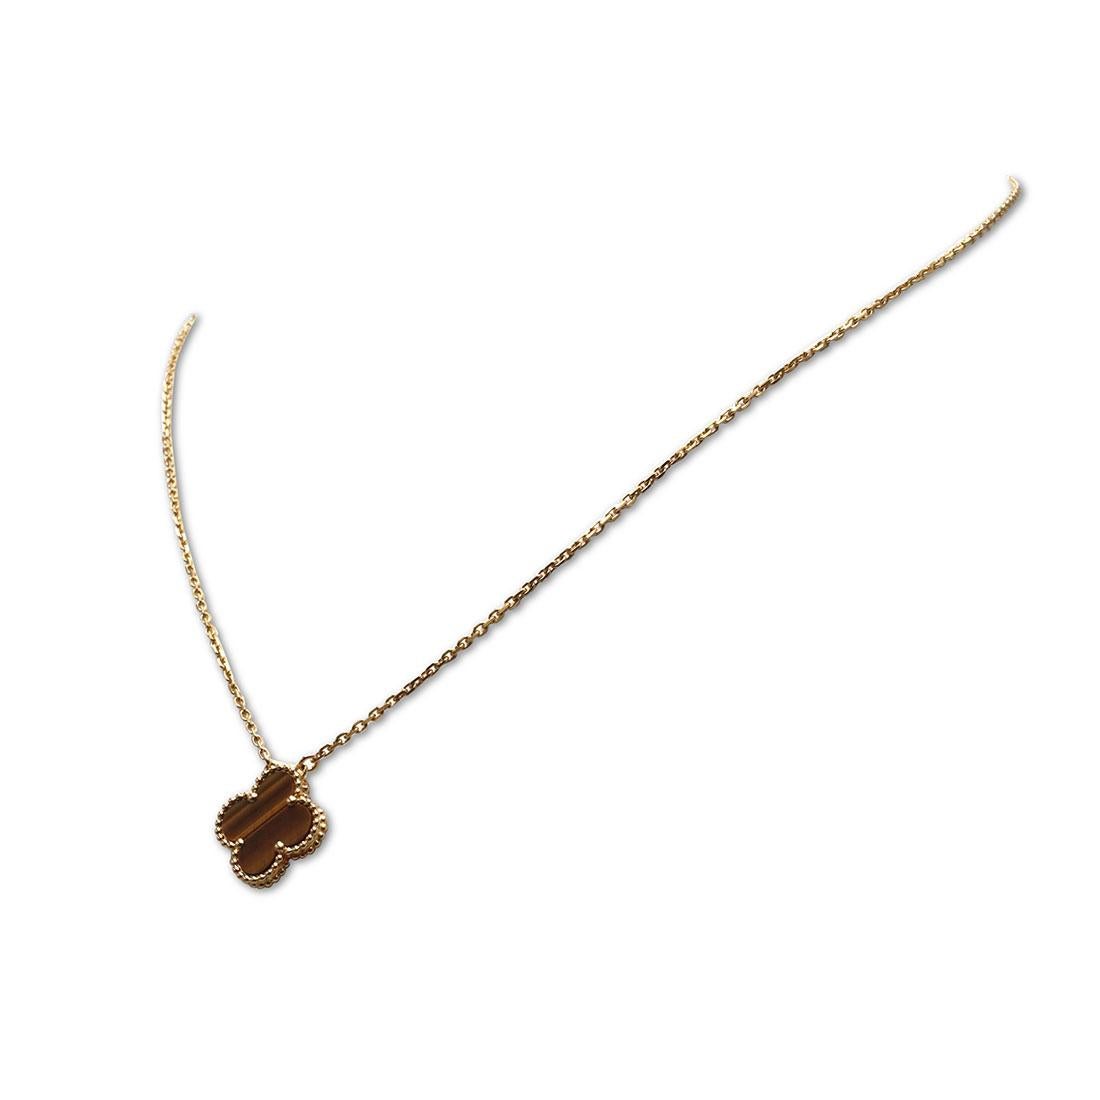 Authentic Van Cleef & Arpels 'Vintage Alhambra' pendant necklace crafted in 18 karat yellow gold features a single clover-inspired motif set with one Tiger's eye stone. Signed VCA, Au750, with serial number. The adjustable chain measures 16 1/2